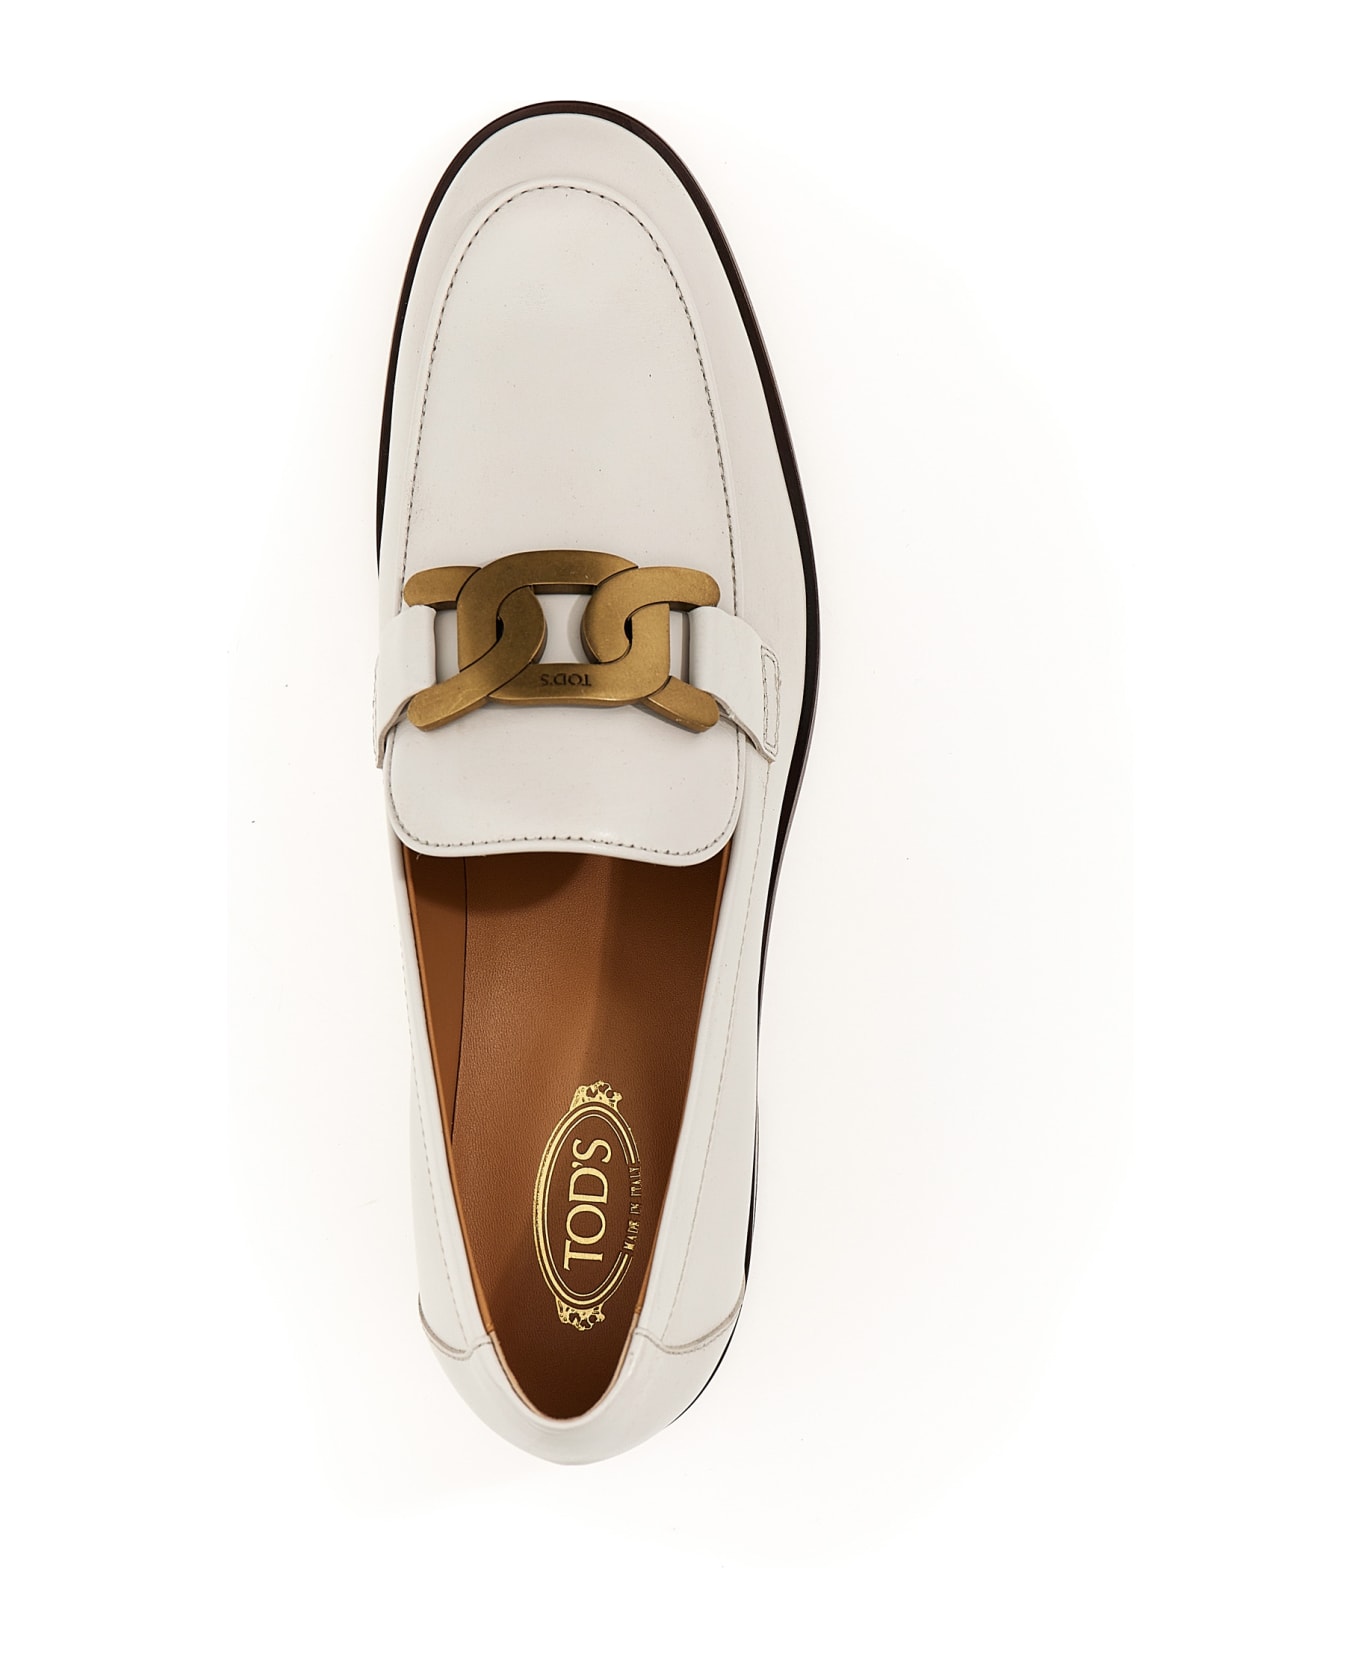 Tod's Leather Loafers With Chain Detail - White